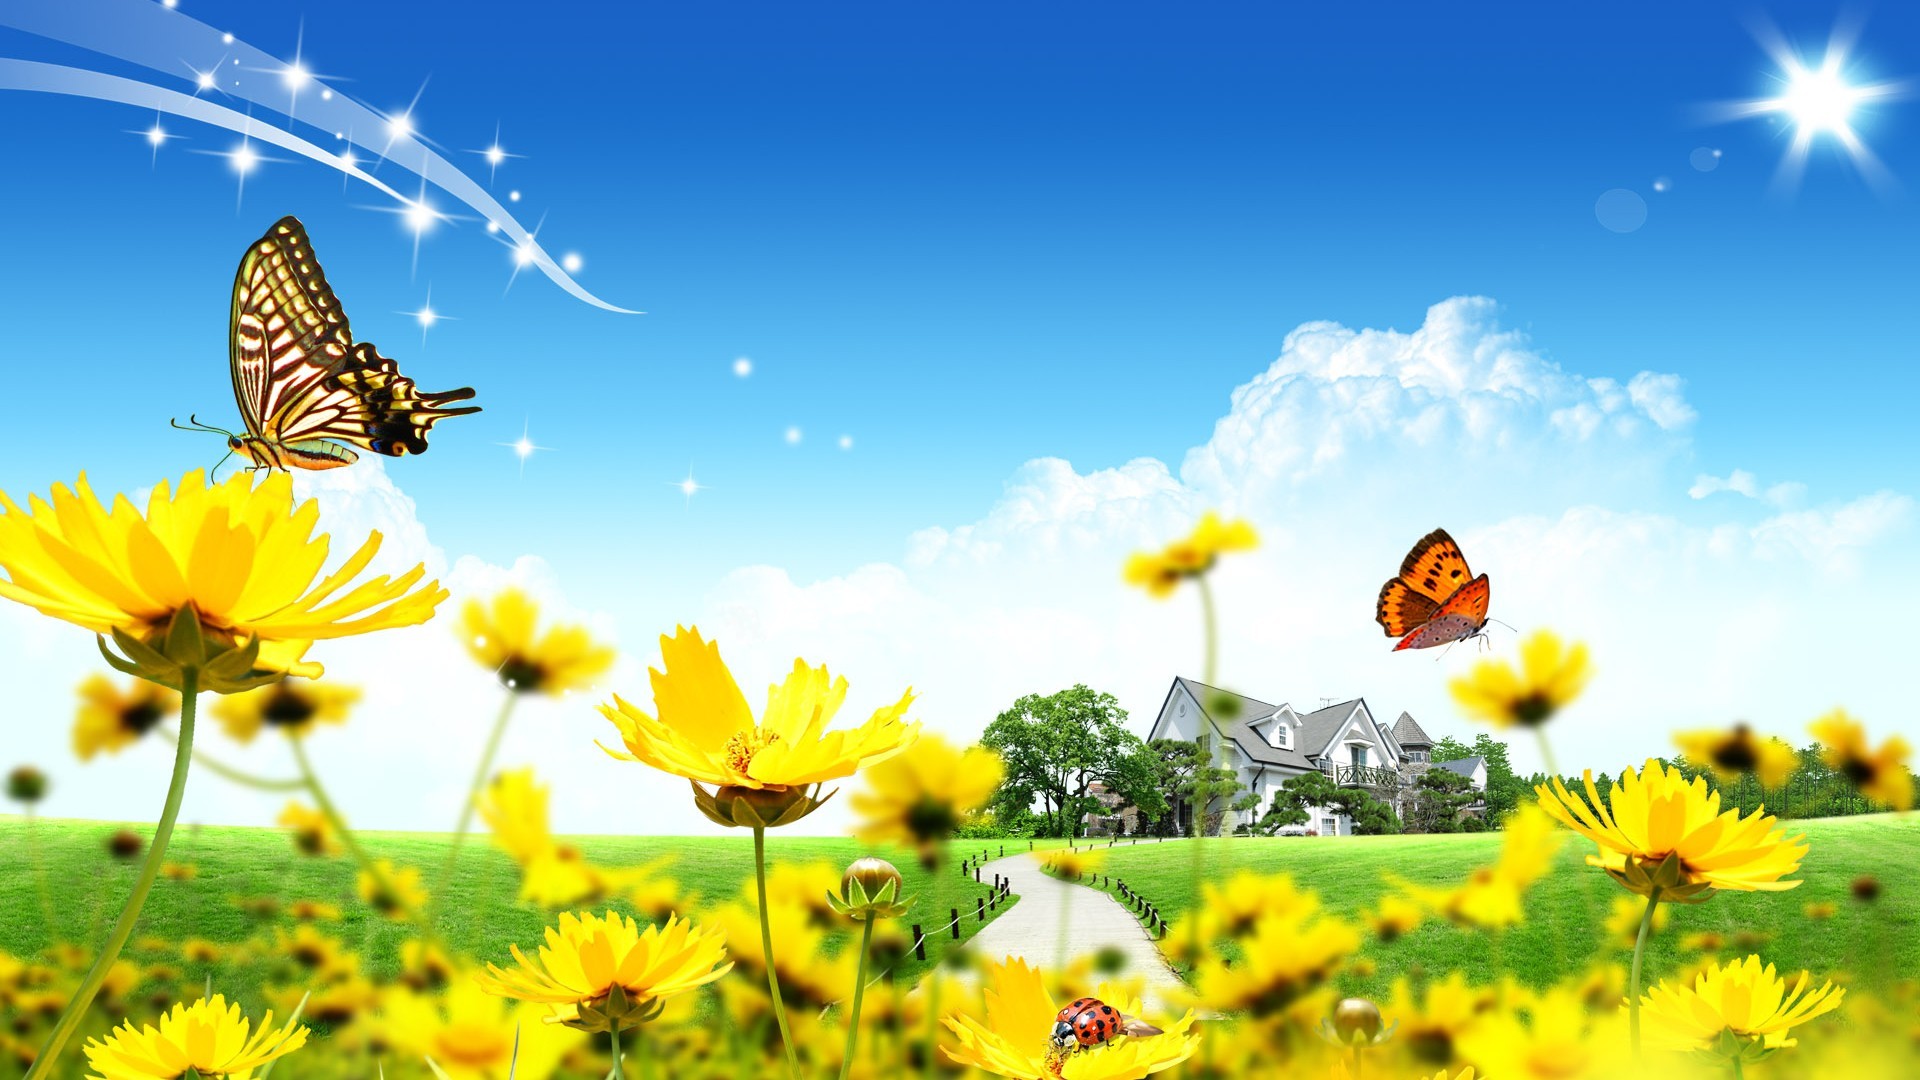 1920x1080 The Sunny Spring Windows 8.1 Theme | All For Windows 10 Free HTML code